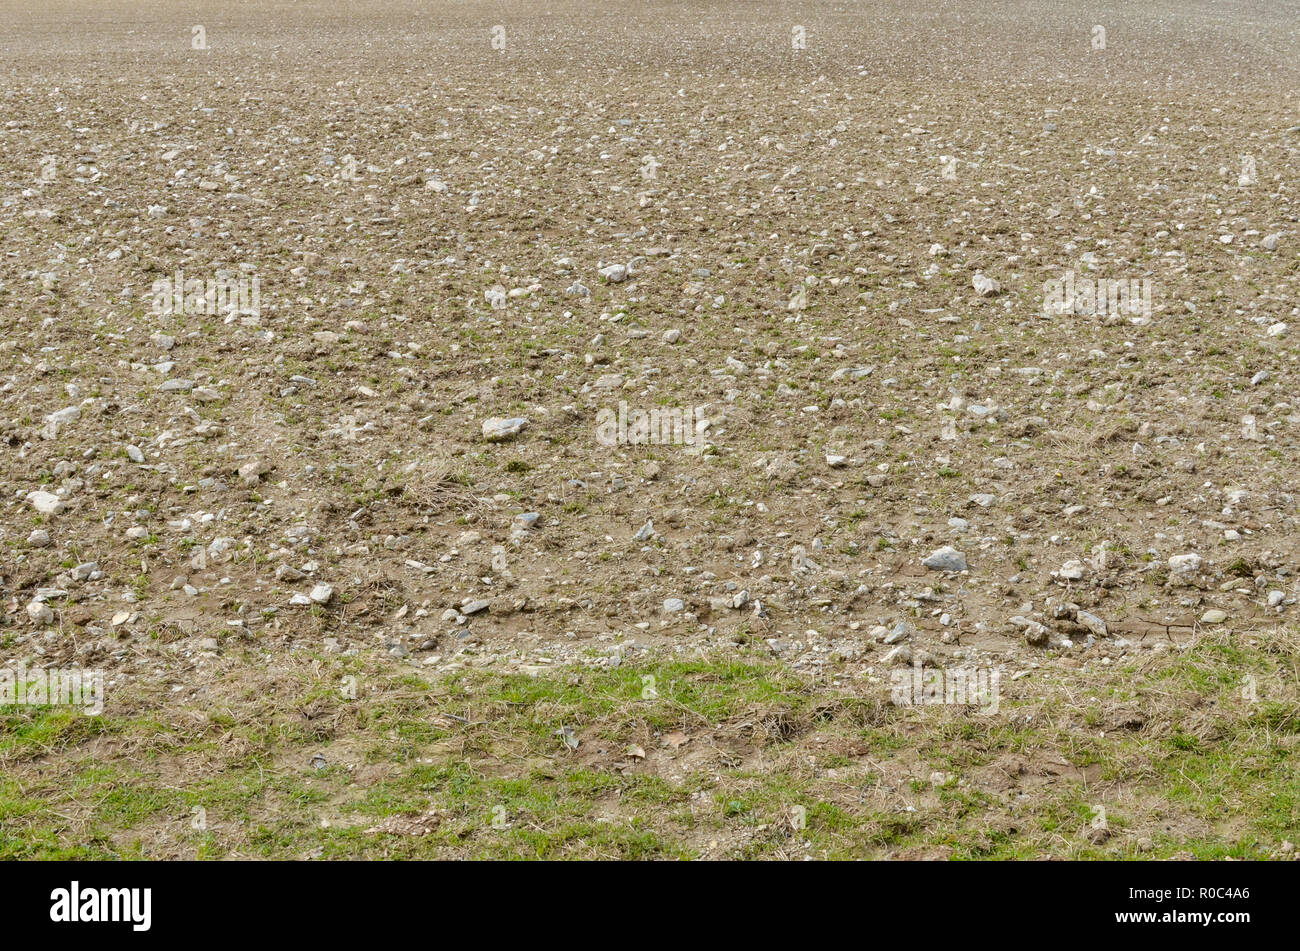 Very stony field - tilled soil after being ploughed and prepared for planting new crop. Ploughed soil texture, soil structure, random concept. Stock Photo